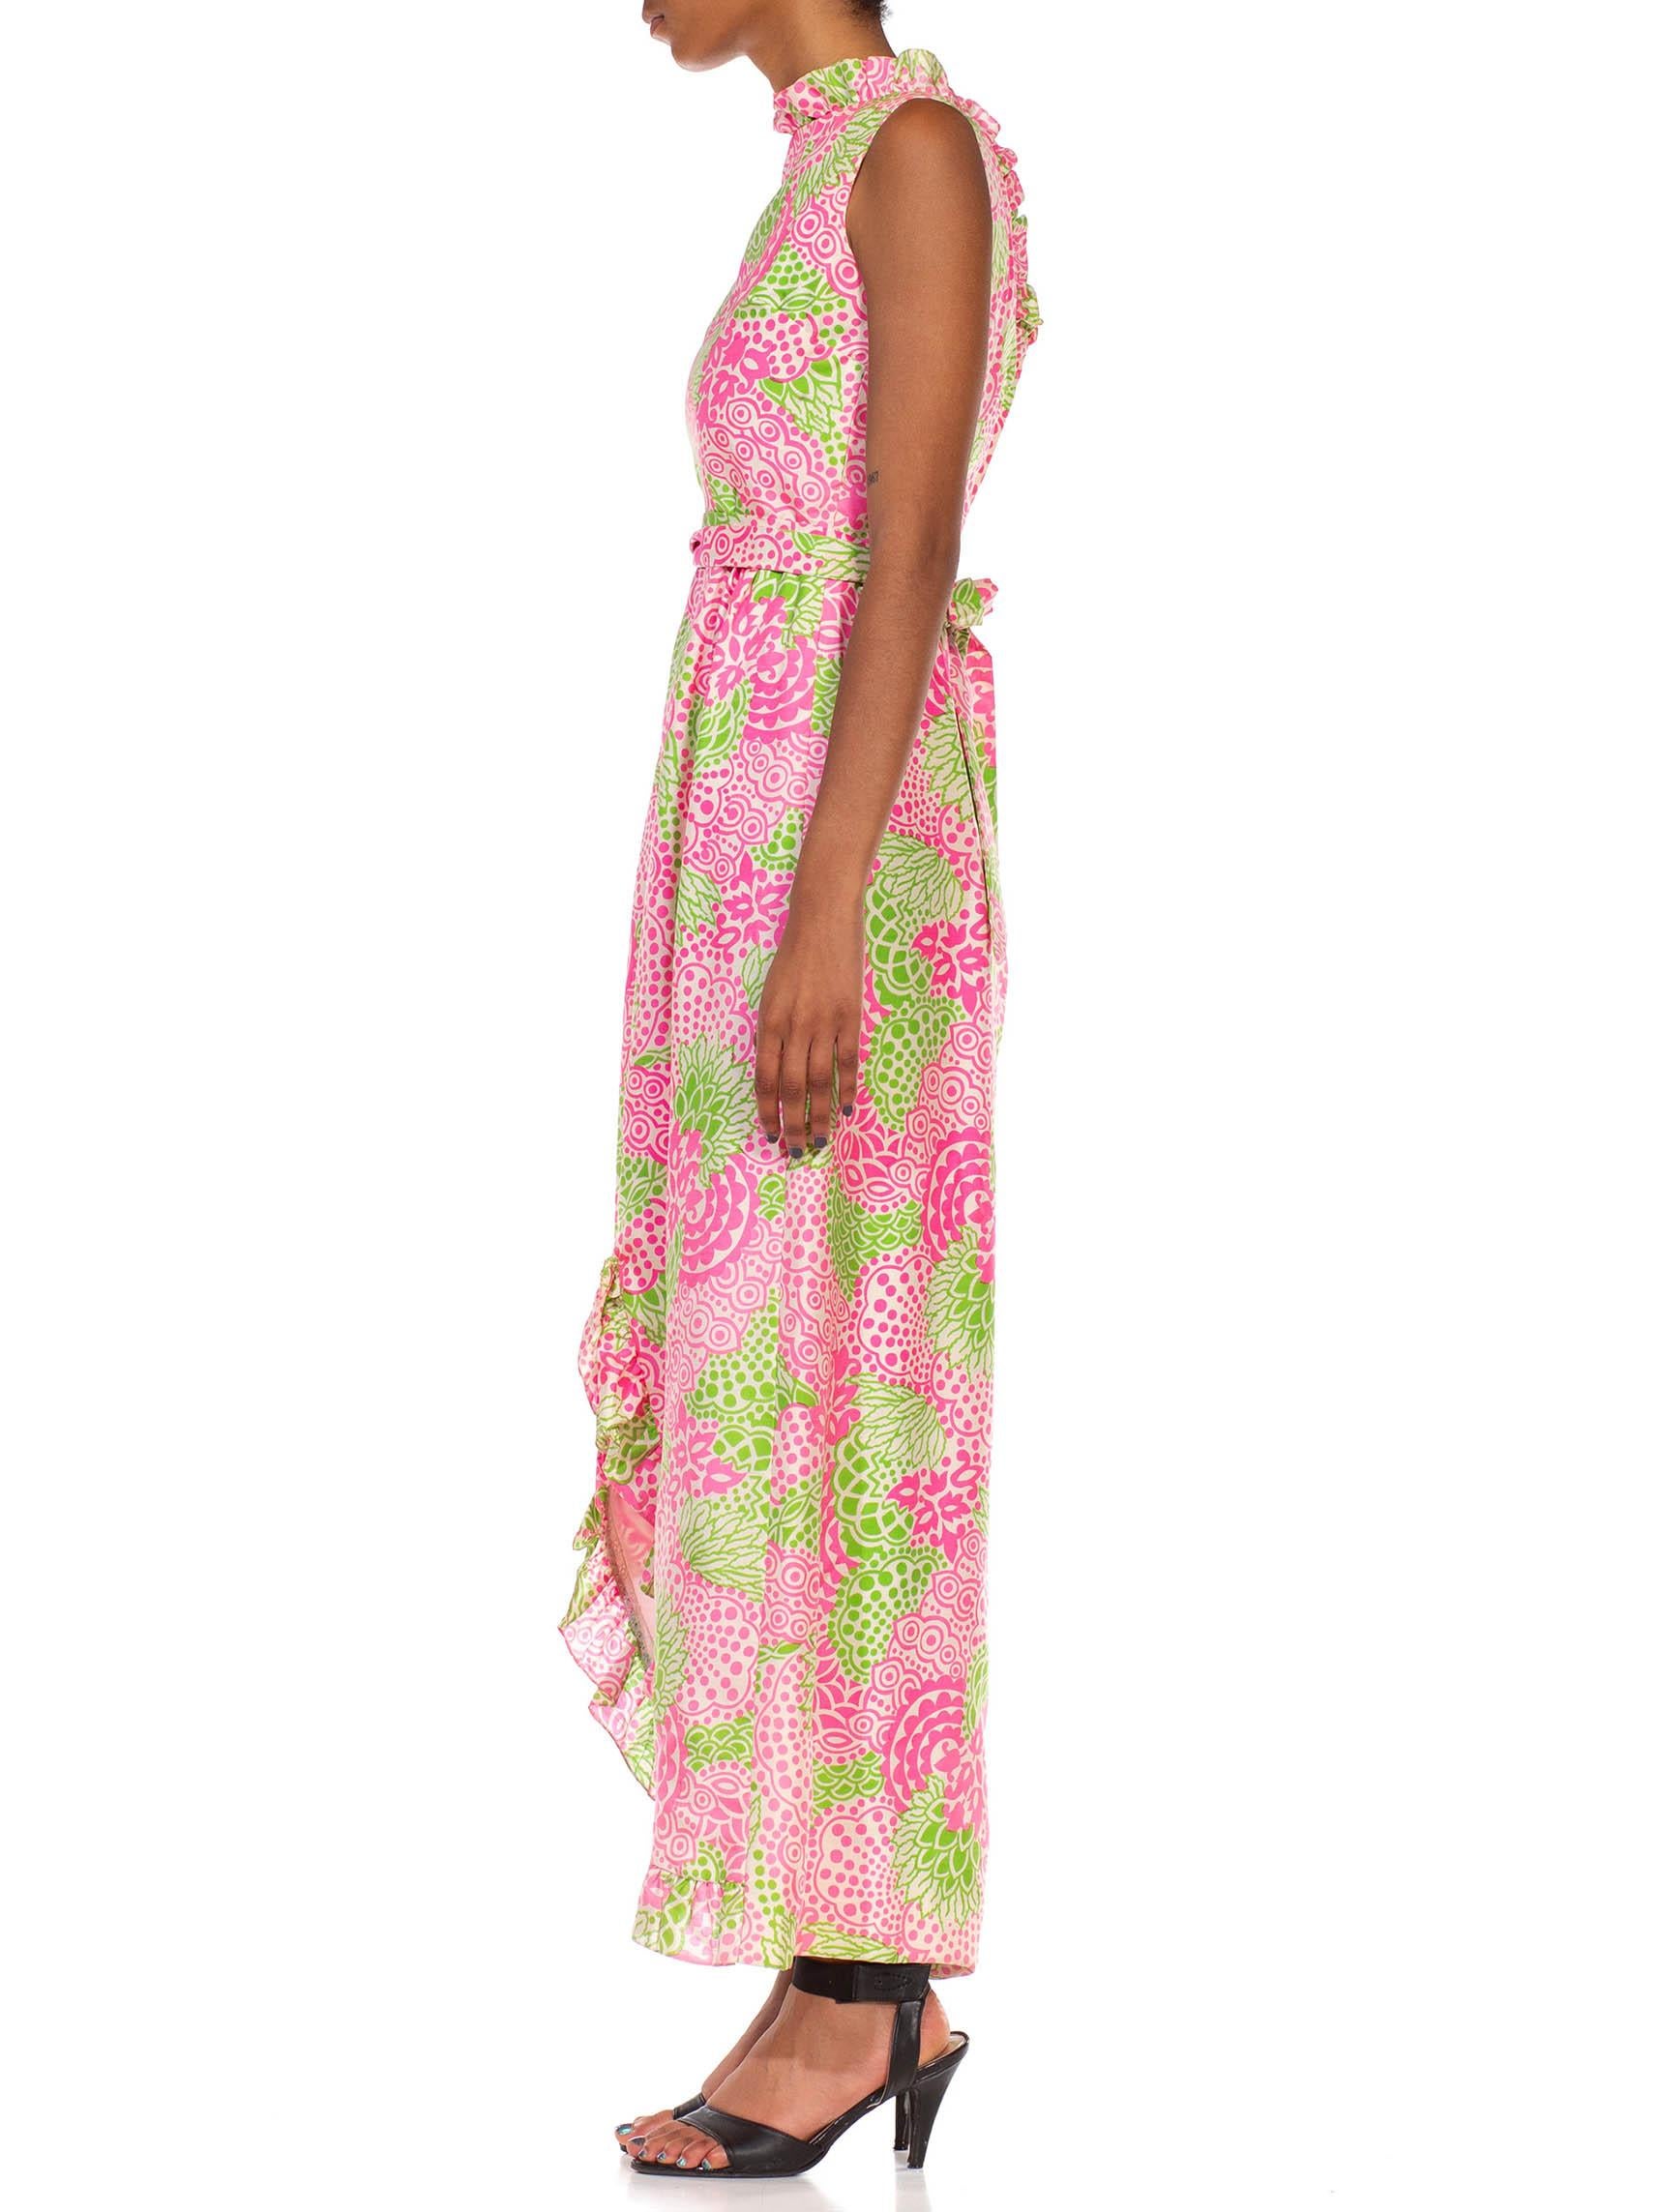 Women's 1960S LILLY PULITZER Style Pink & Green Cotton Sleeveless Maxi Dress  For Sale